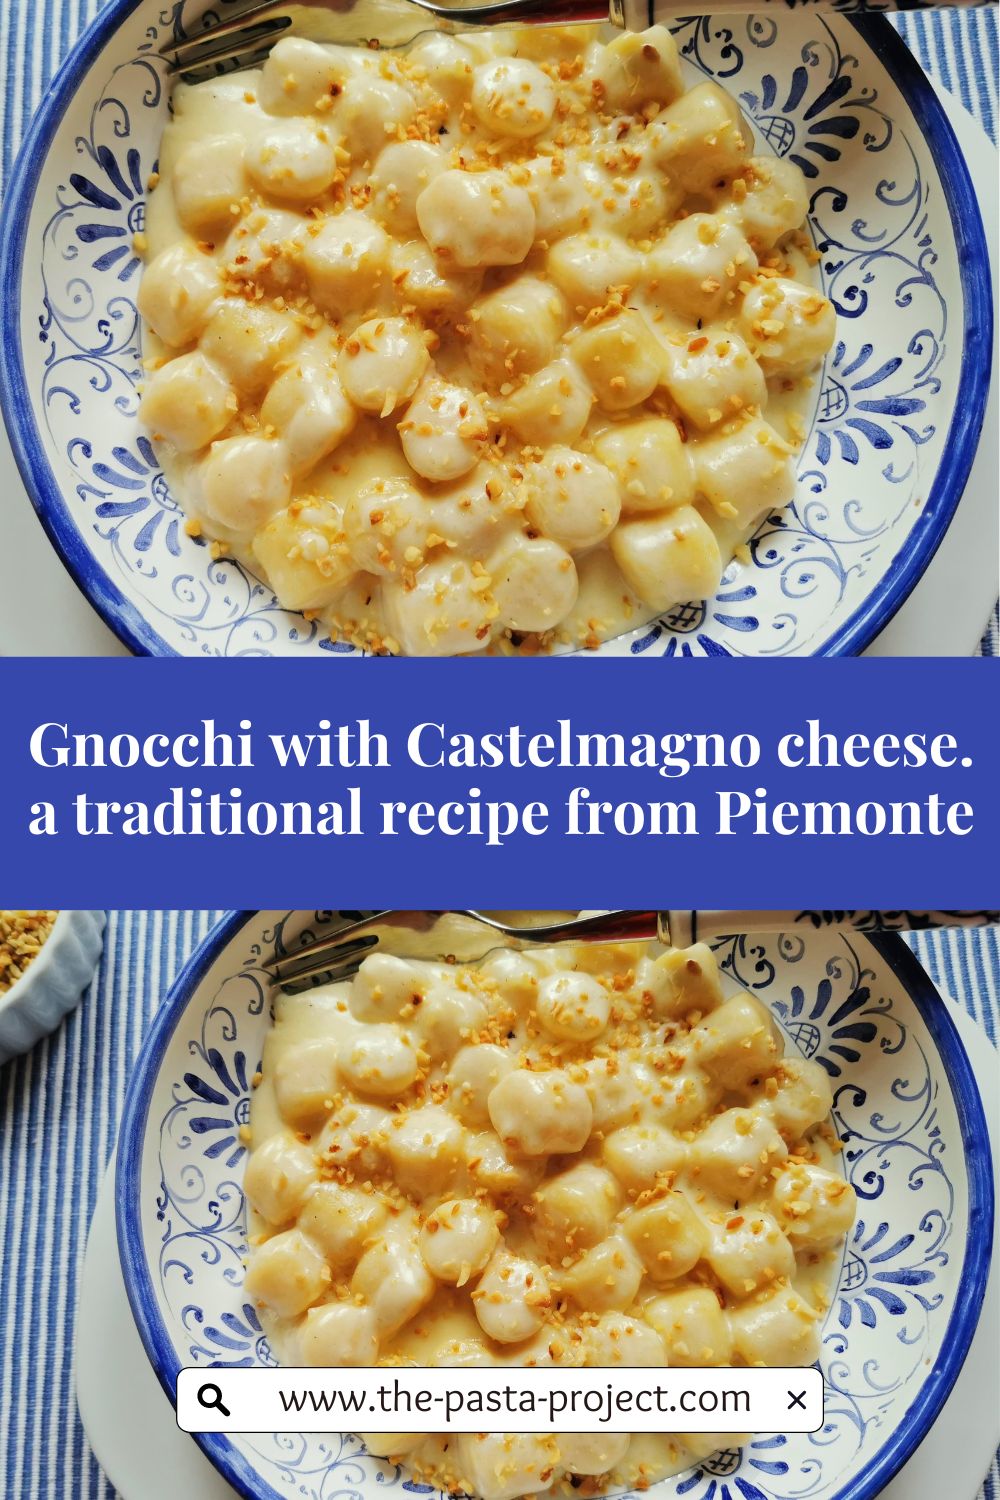 Gnocchi with Castelmagno cheese a traditional recipe from Piemonte.